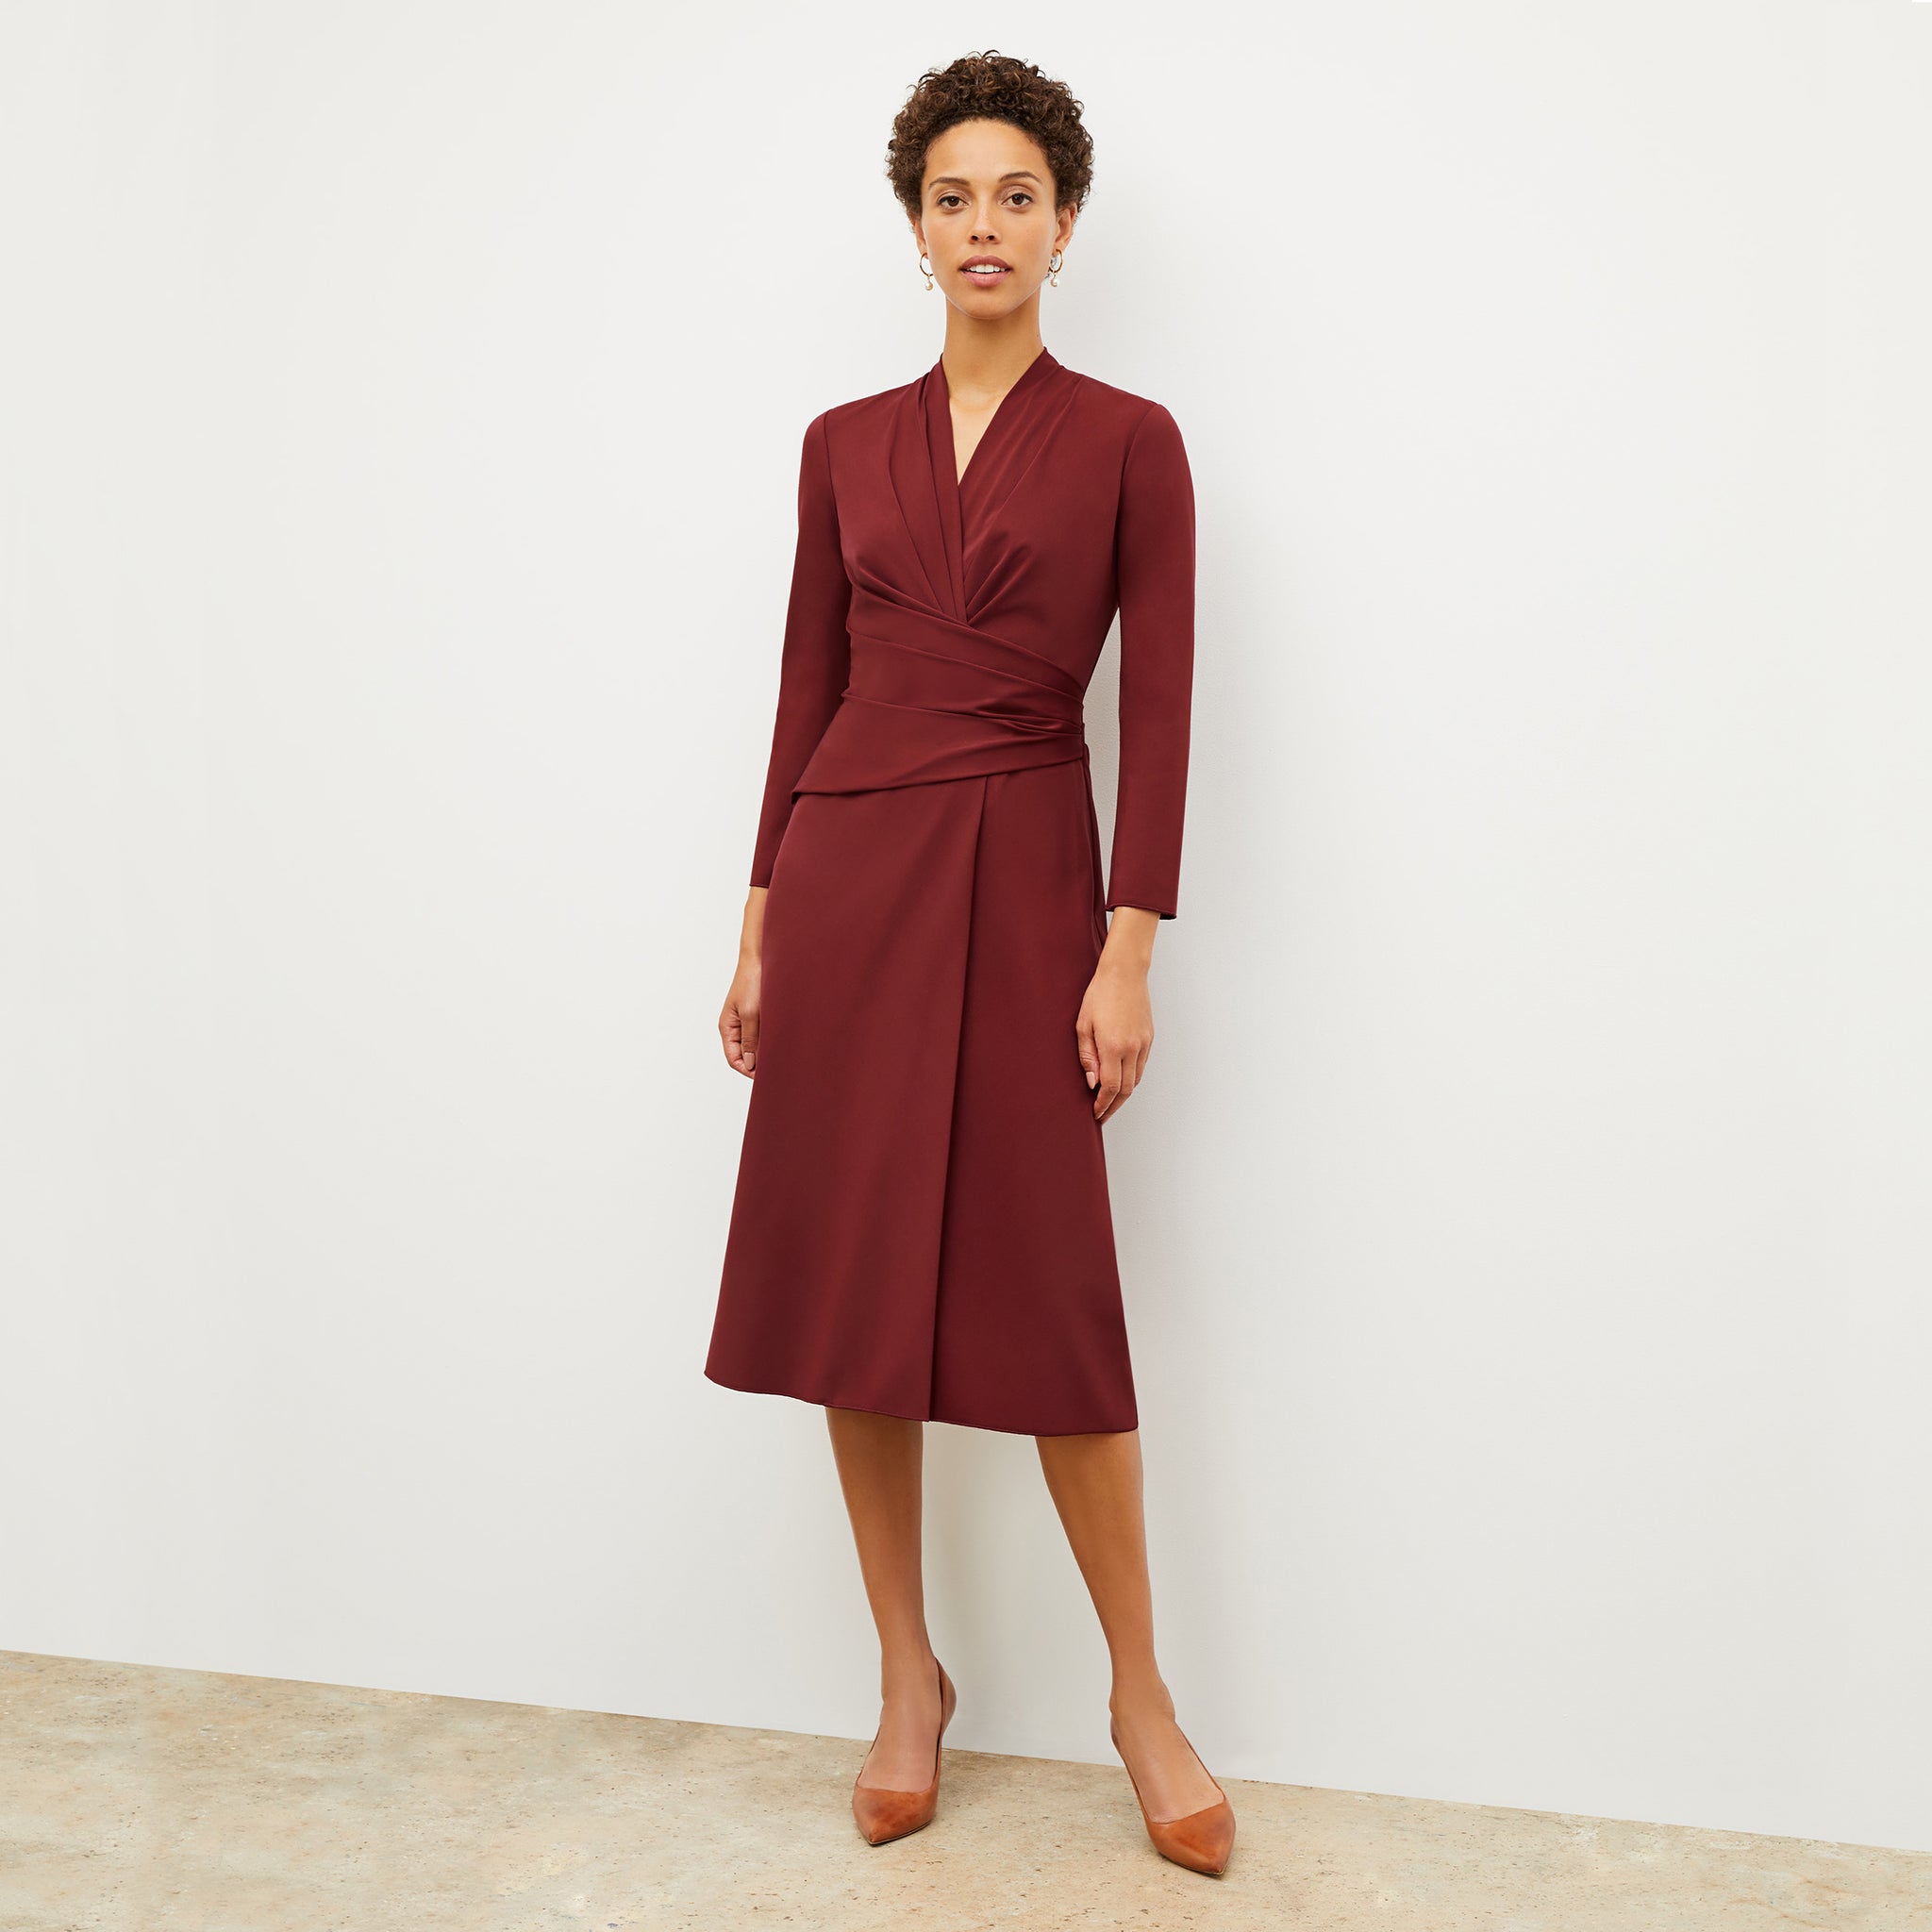 Front image of a woman wearing the carly dress in maroon